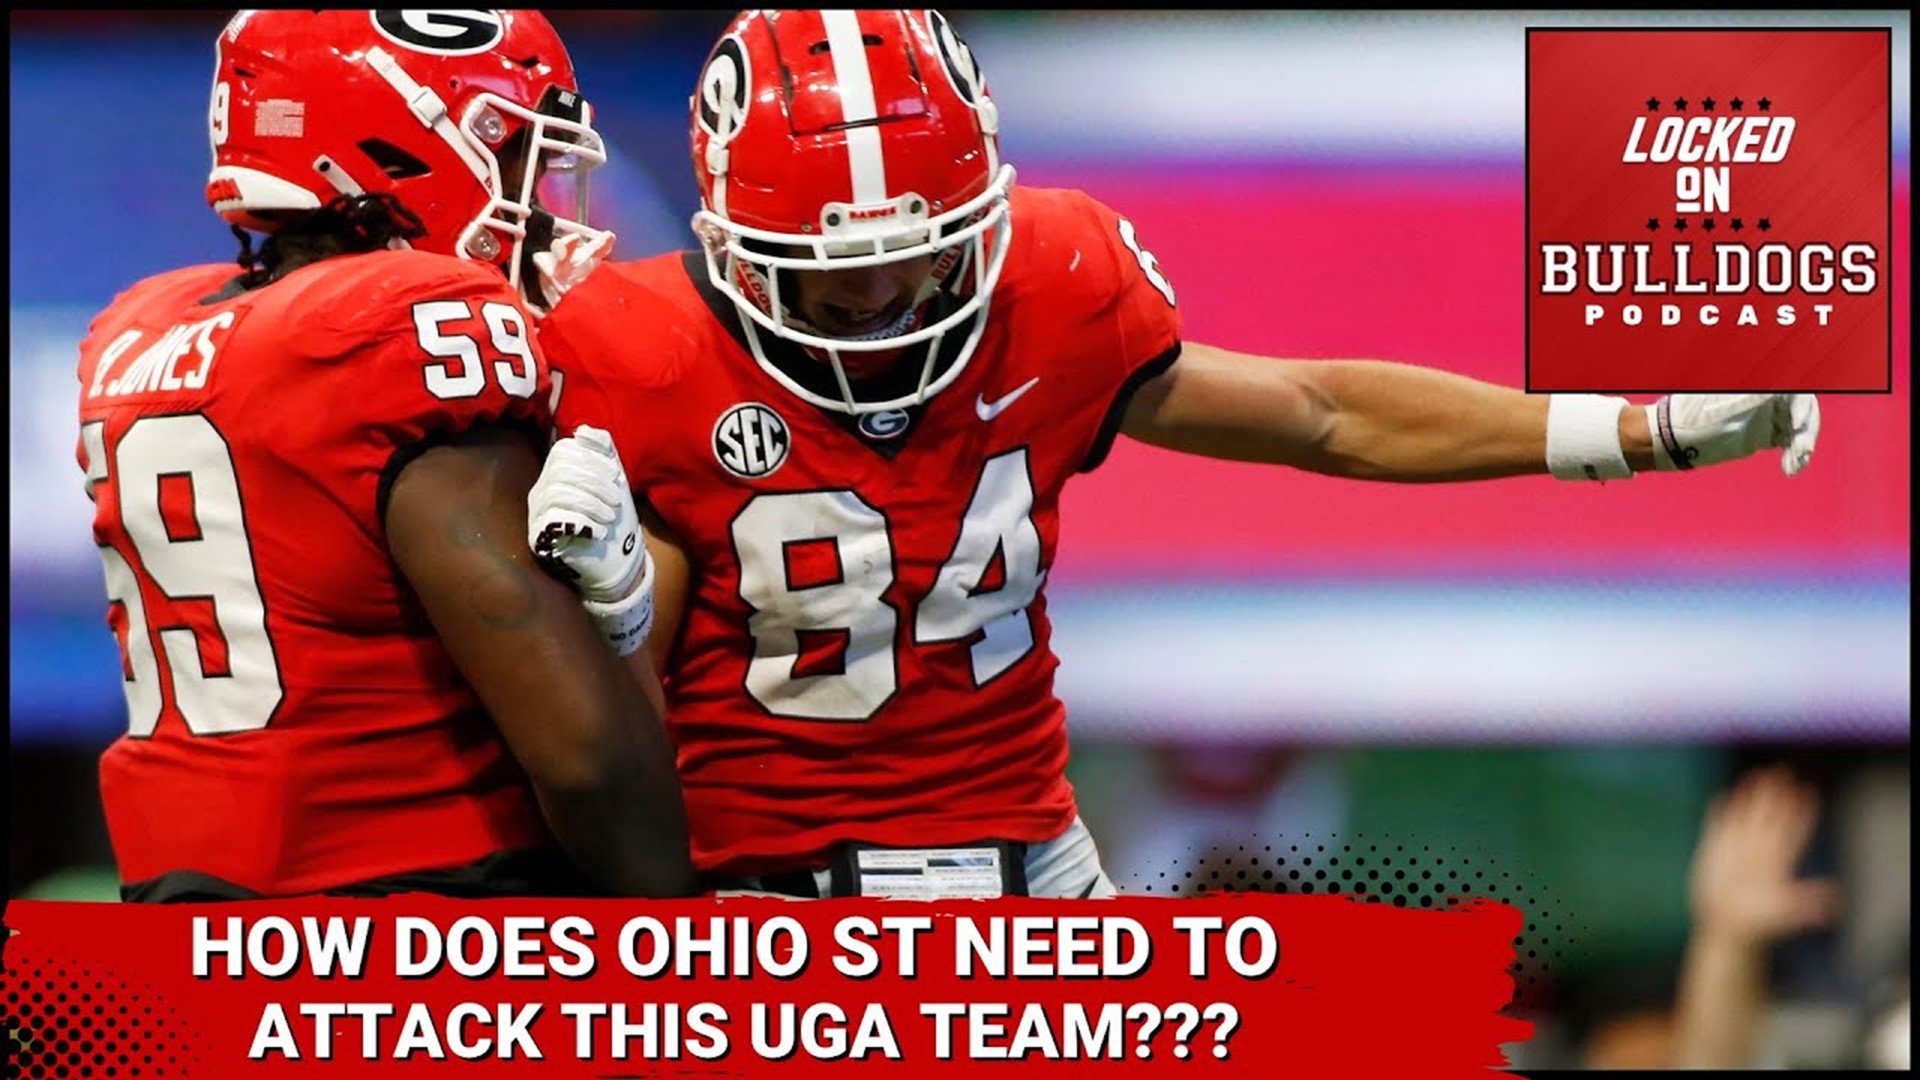 How can the Buckeyes pull off the upset? Can Georgia be beaten??